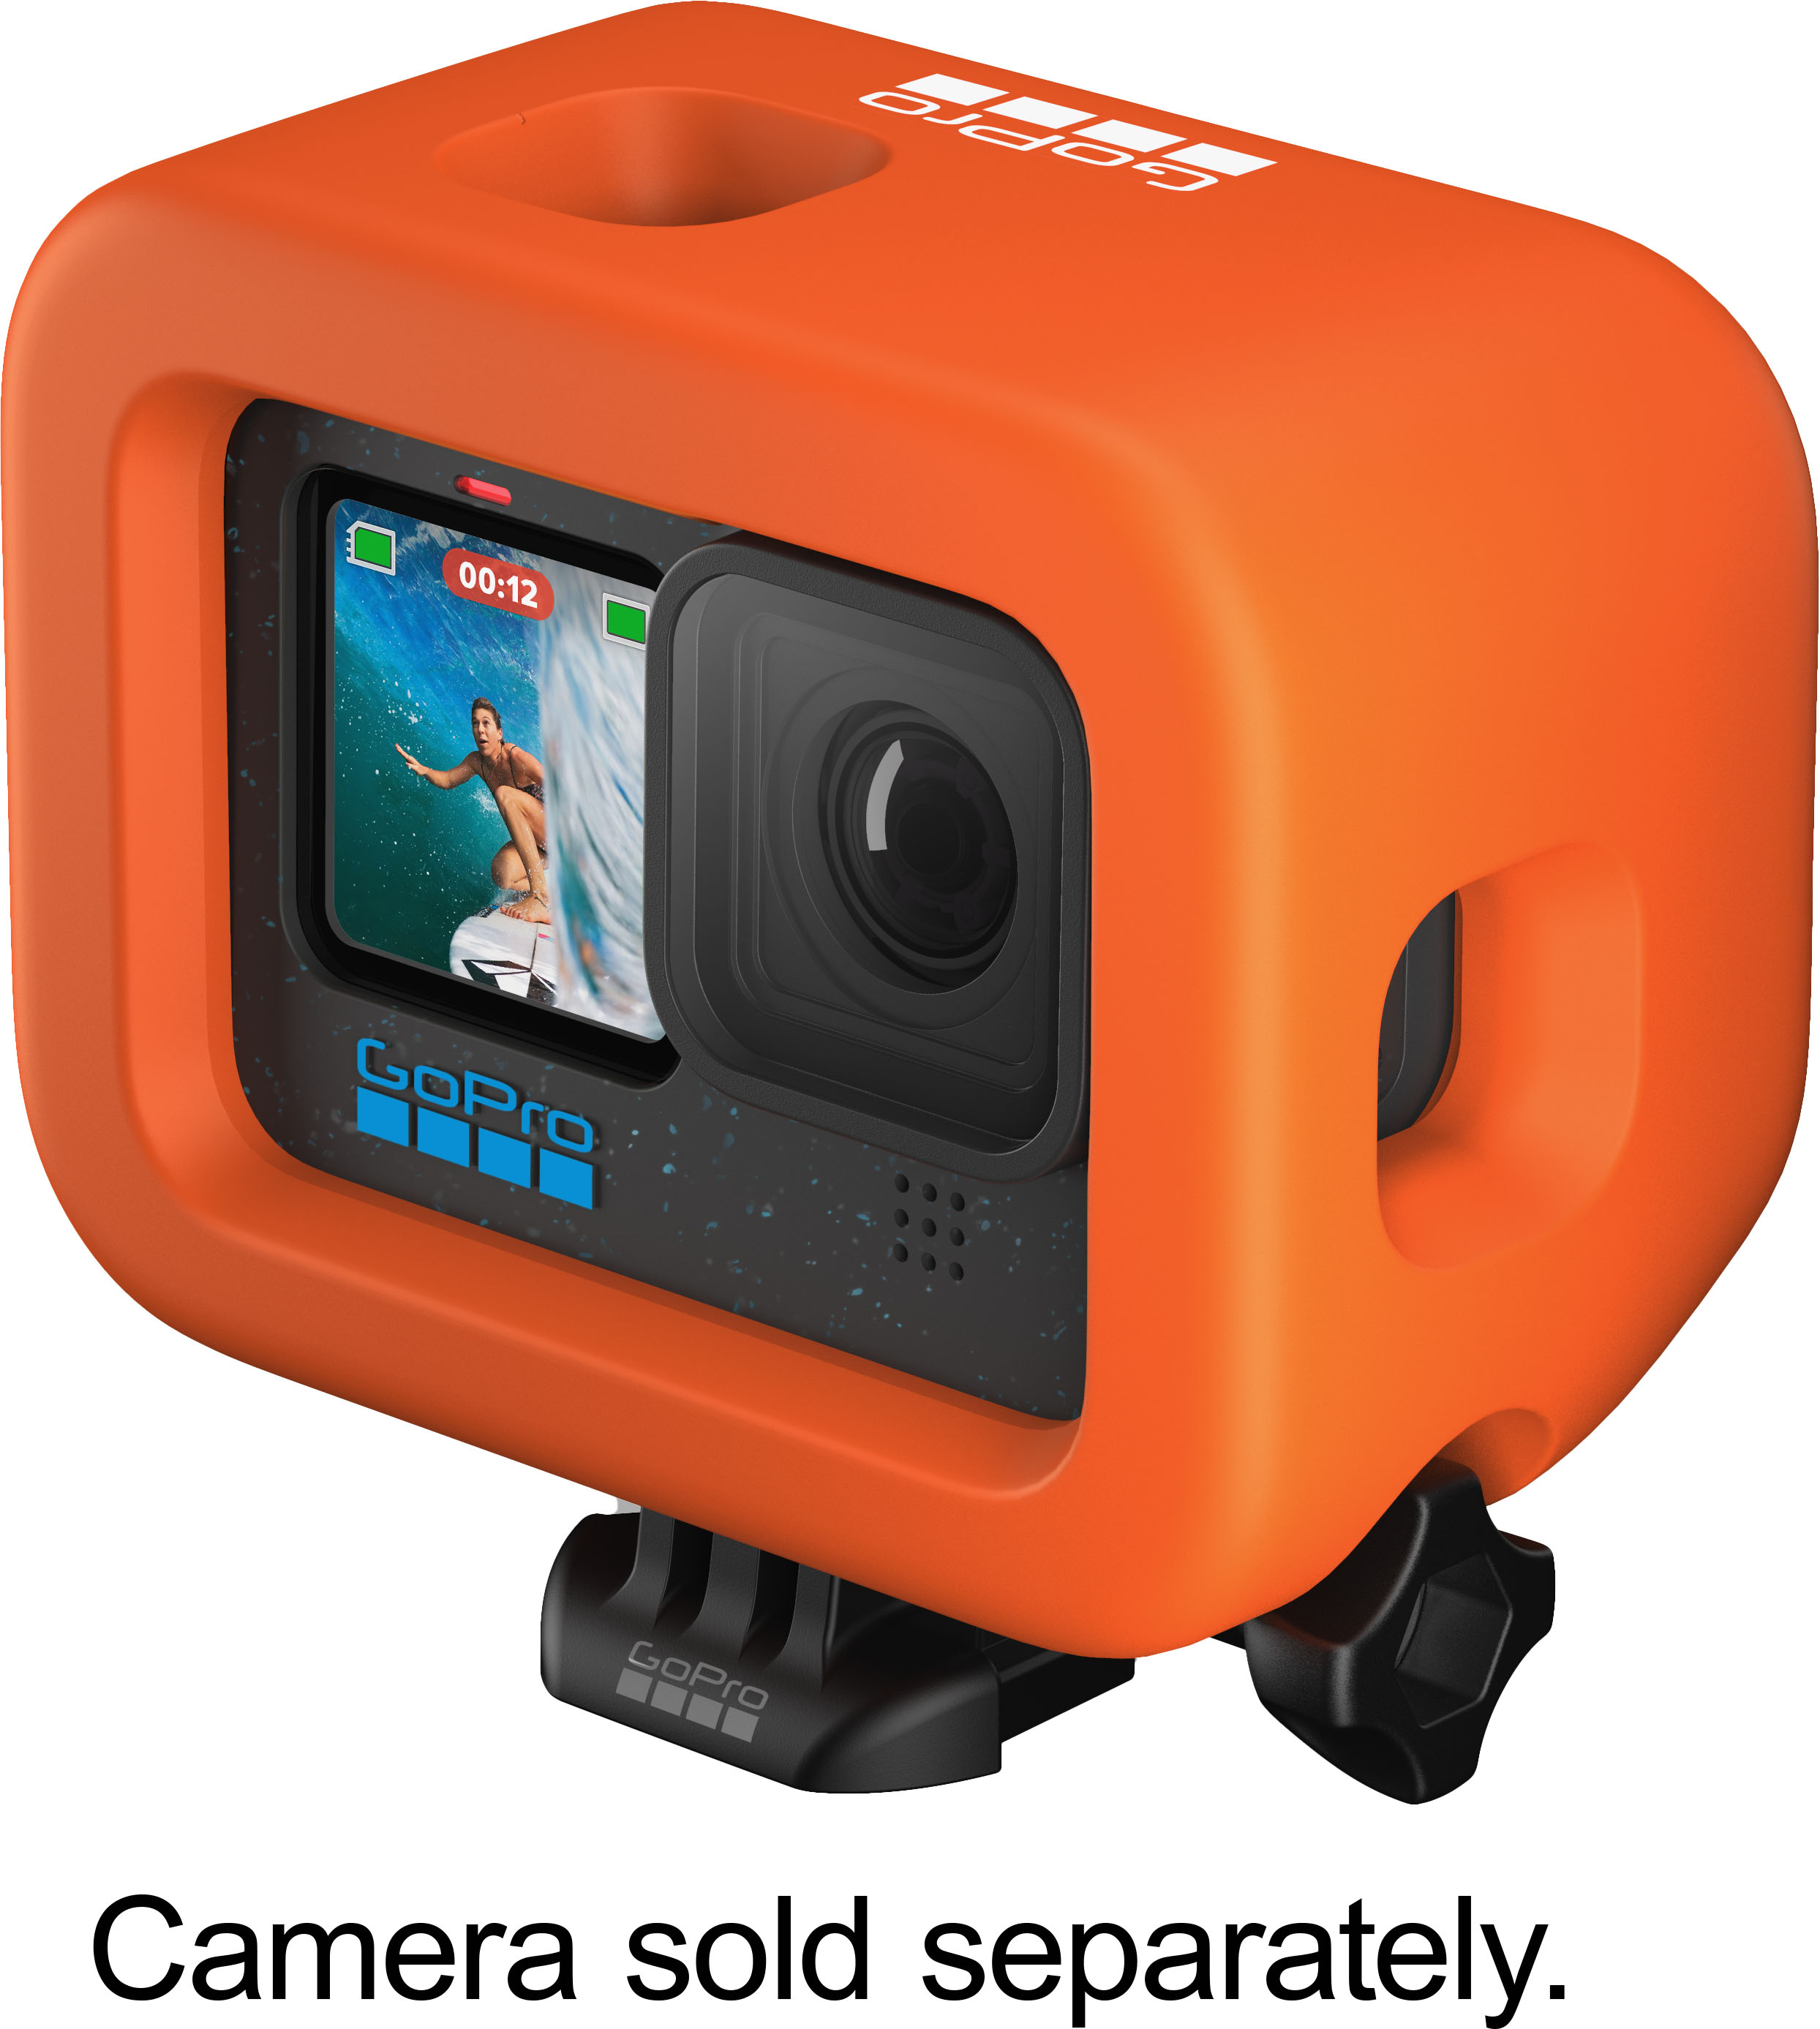 Floaty For Gopro Hero 4 Hero 3 Orange Floating Case For Gopro 3 4 Floater Accessory Use For Swimming Diving And Water Sports Cameras Housings Underwater Photography